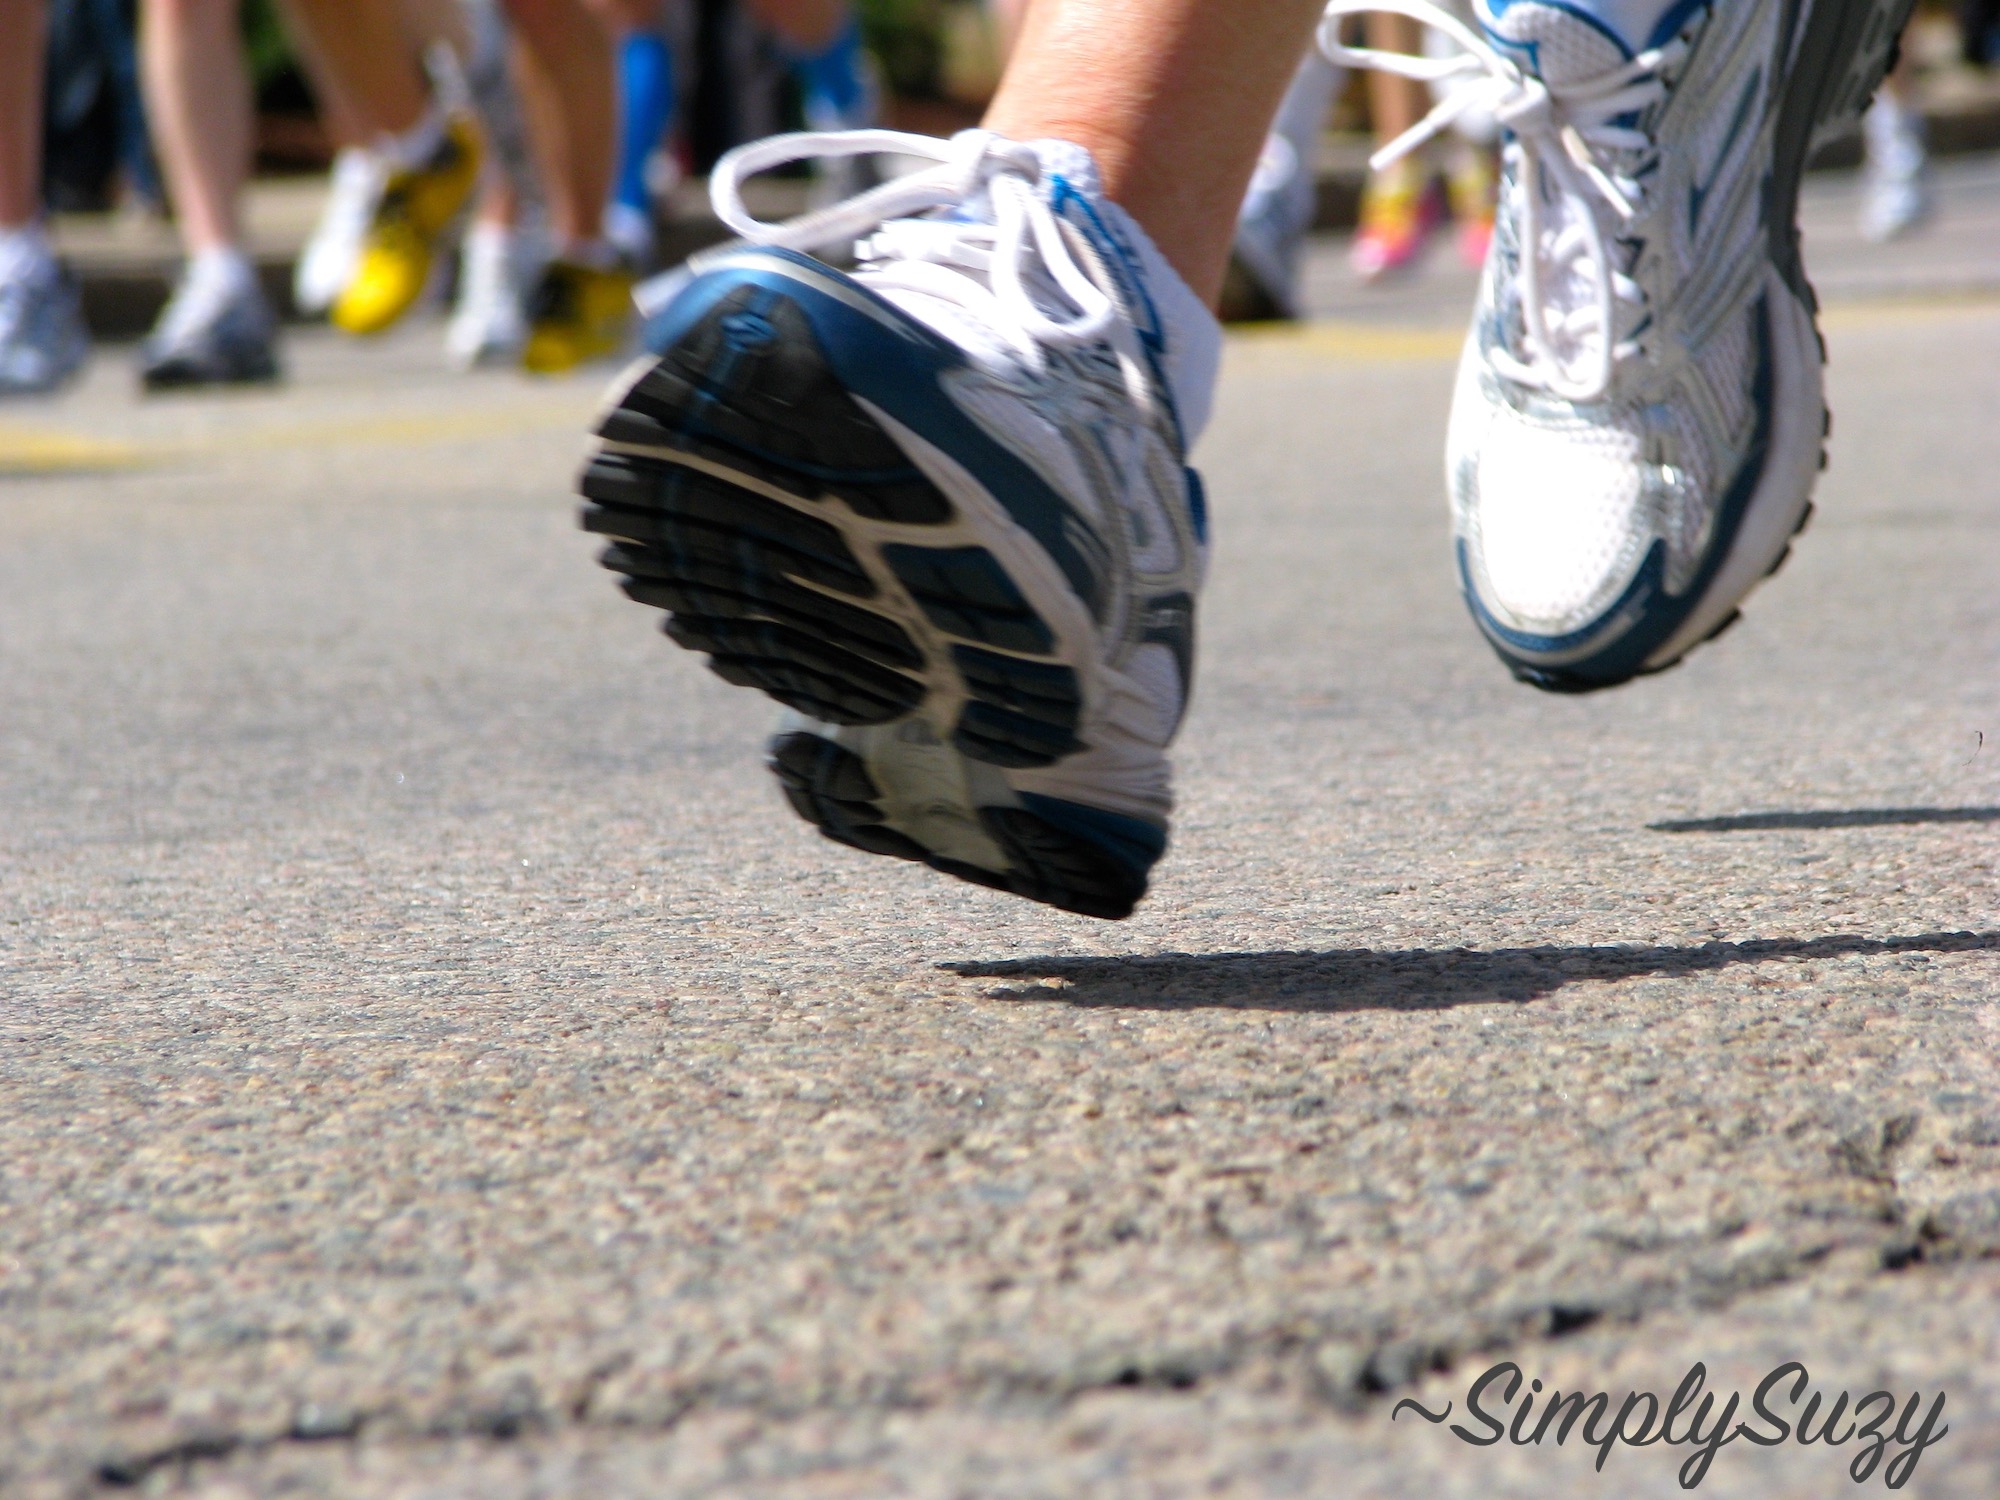 A set of feet running on the pavement during a race.